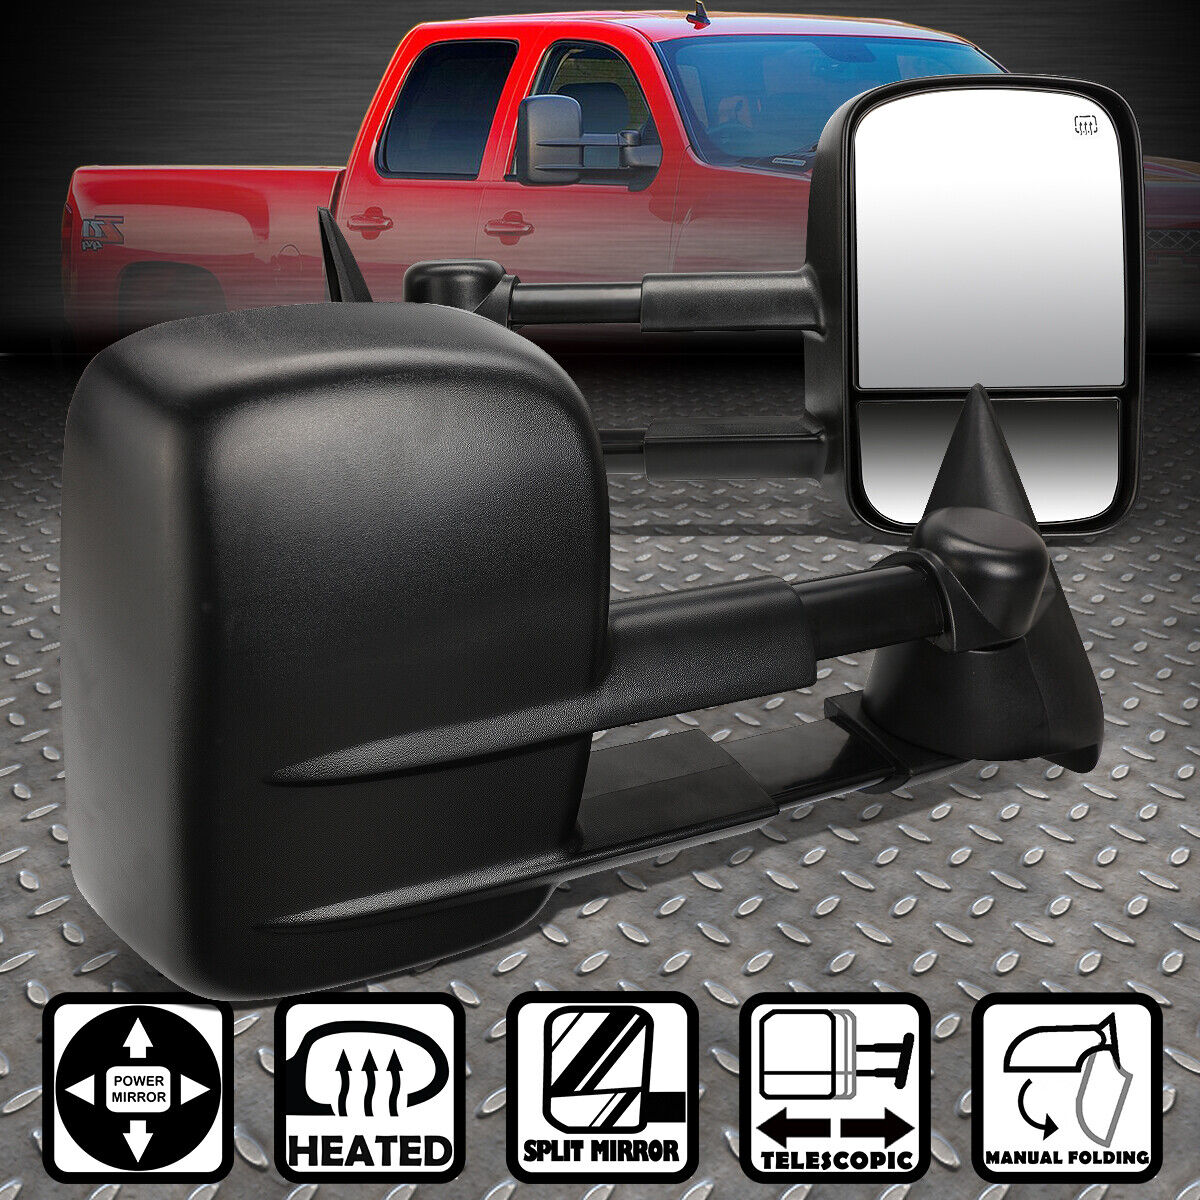 FOR 99-02 CHEVY SILVERADO GMC SIERRA 1500-350 POWERED+HEATED SIDE TOWING MIRRORS